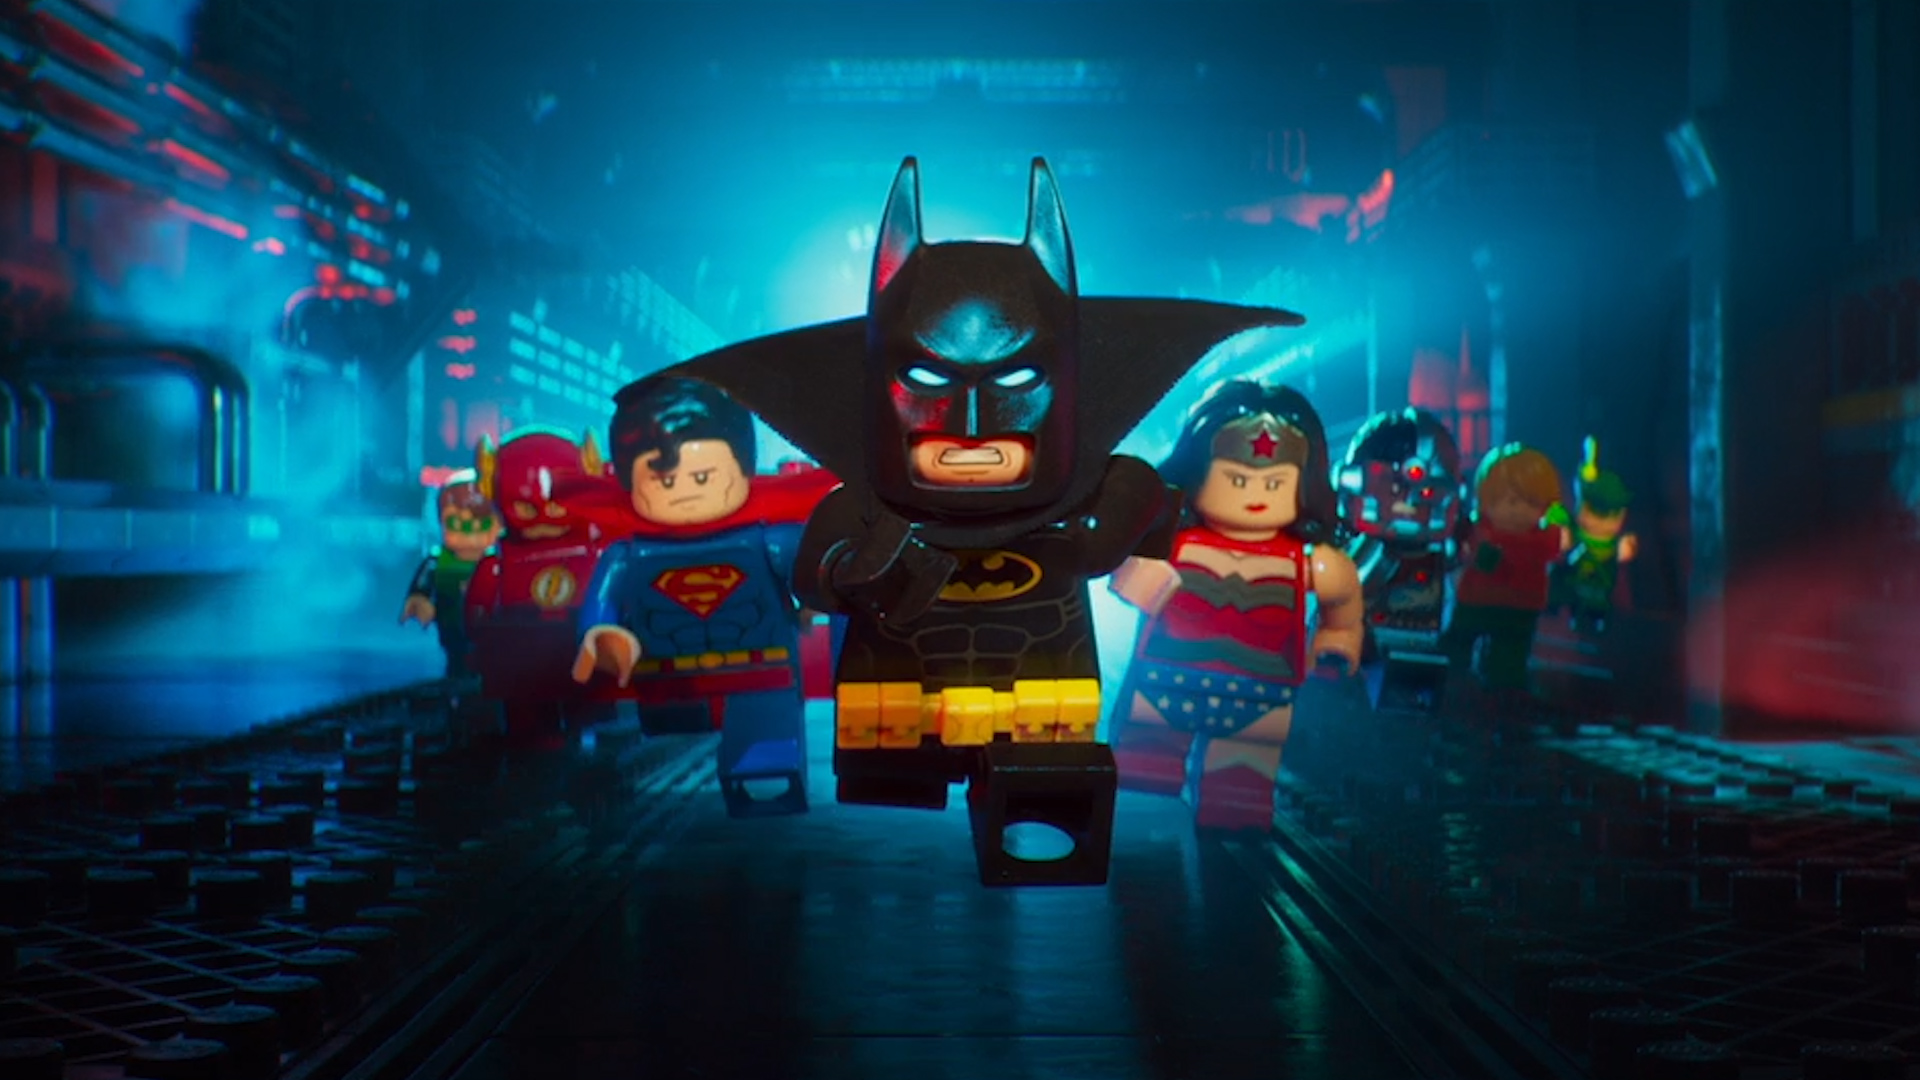 Is The LEGO Batman Movie still awesome six years later? – Blocks